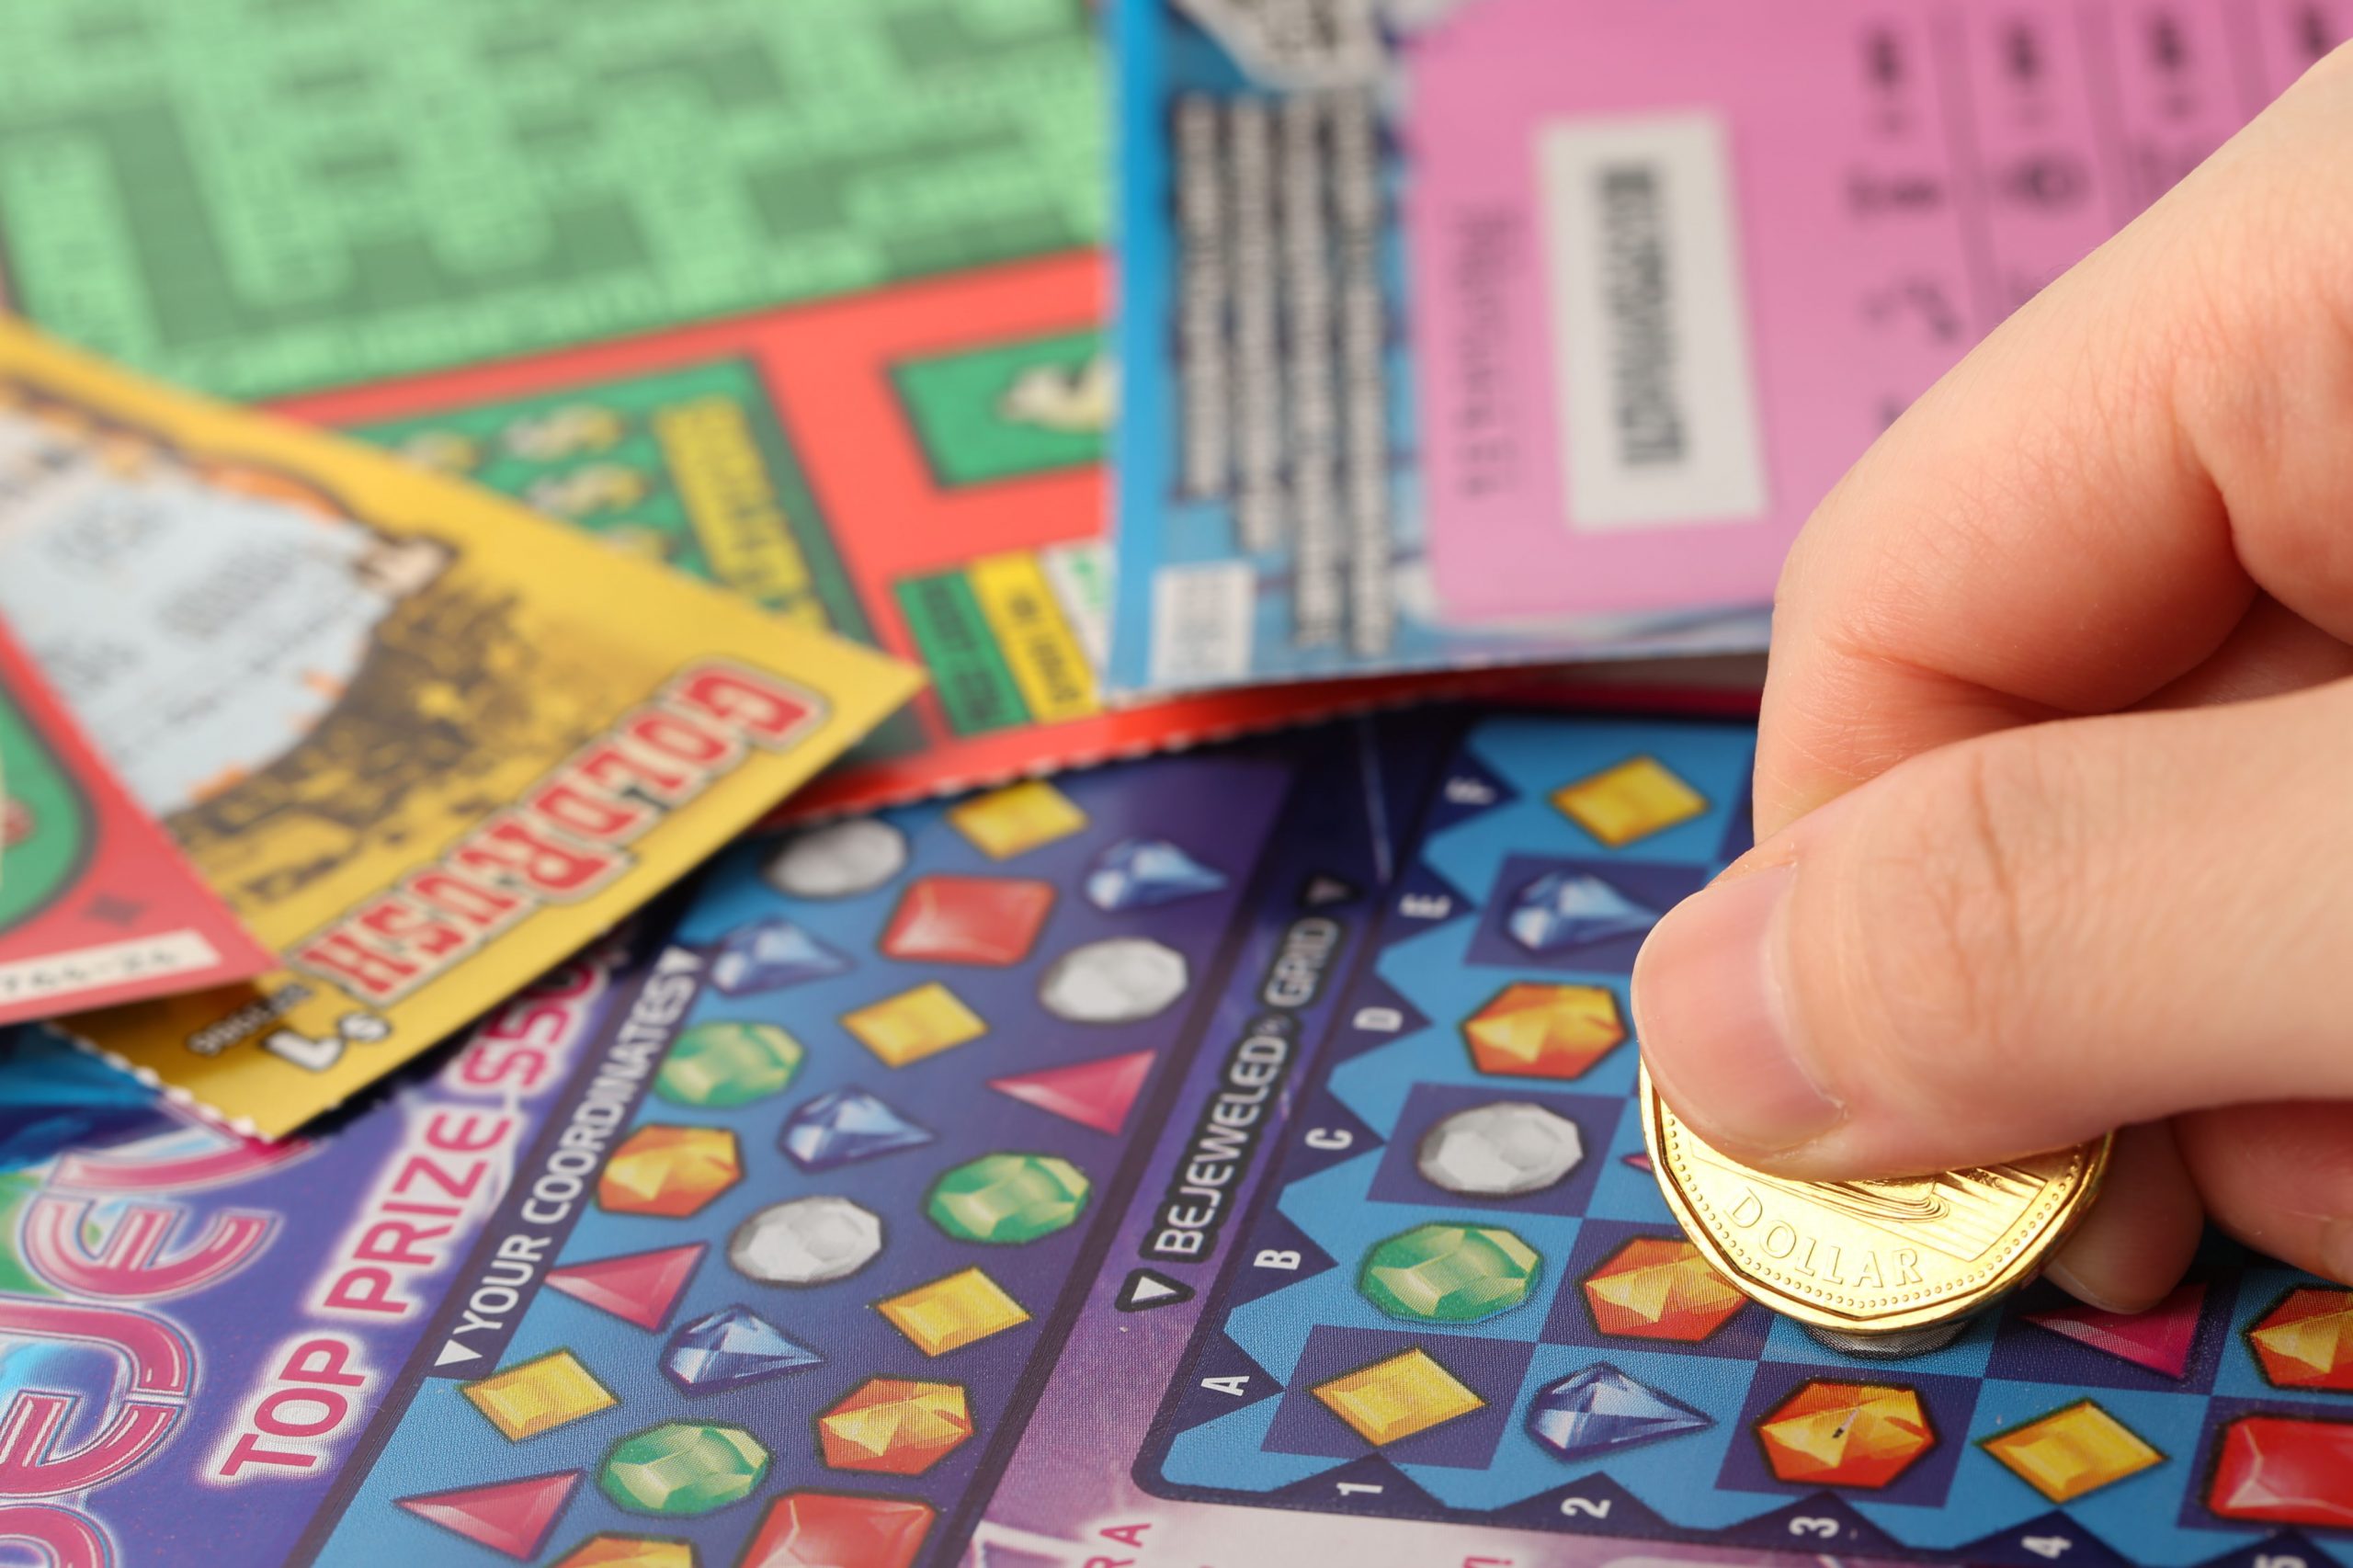 A Comparison Of Eurojackpot And EuroMillions Lottery Tickets